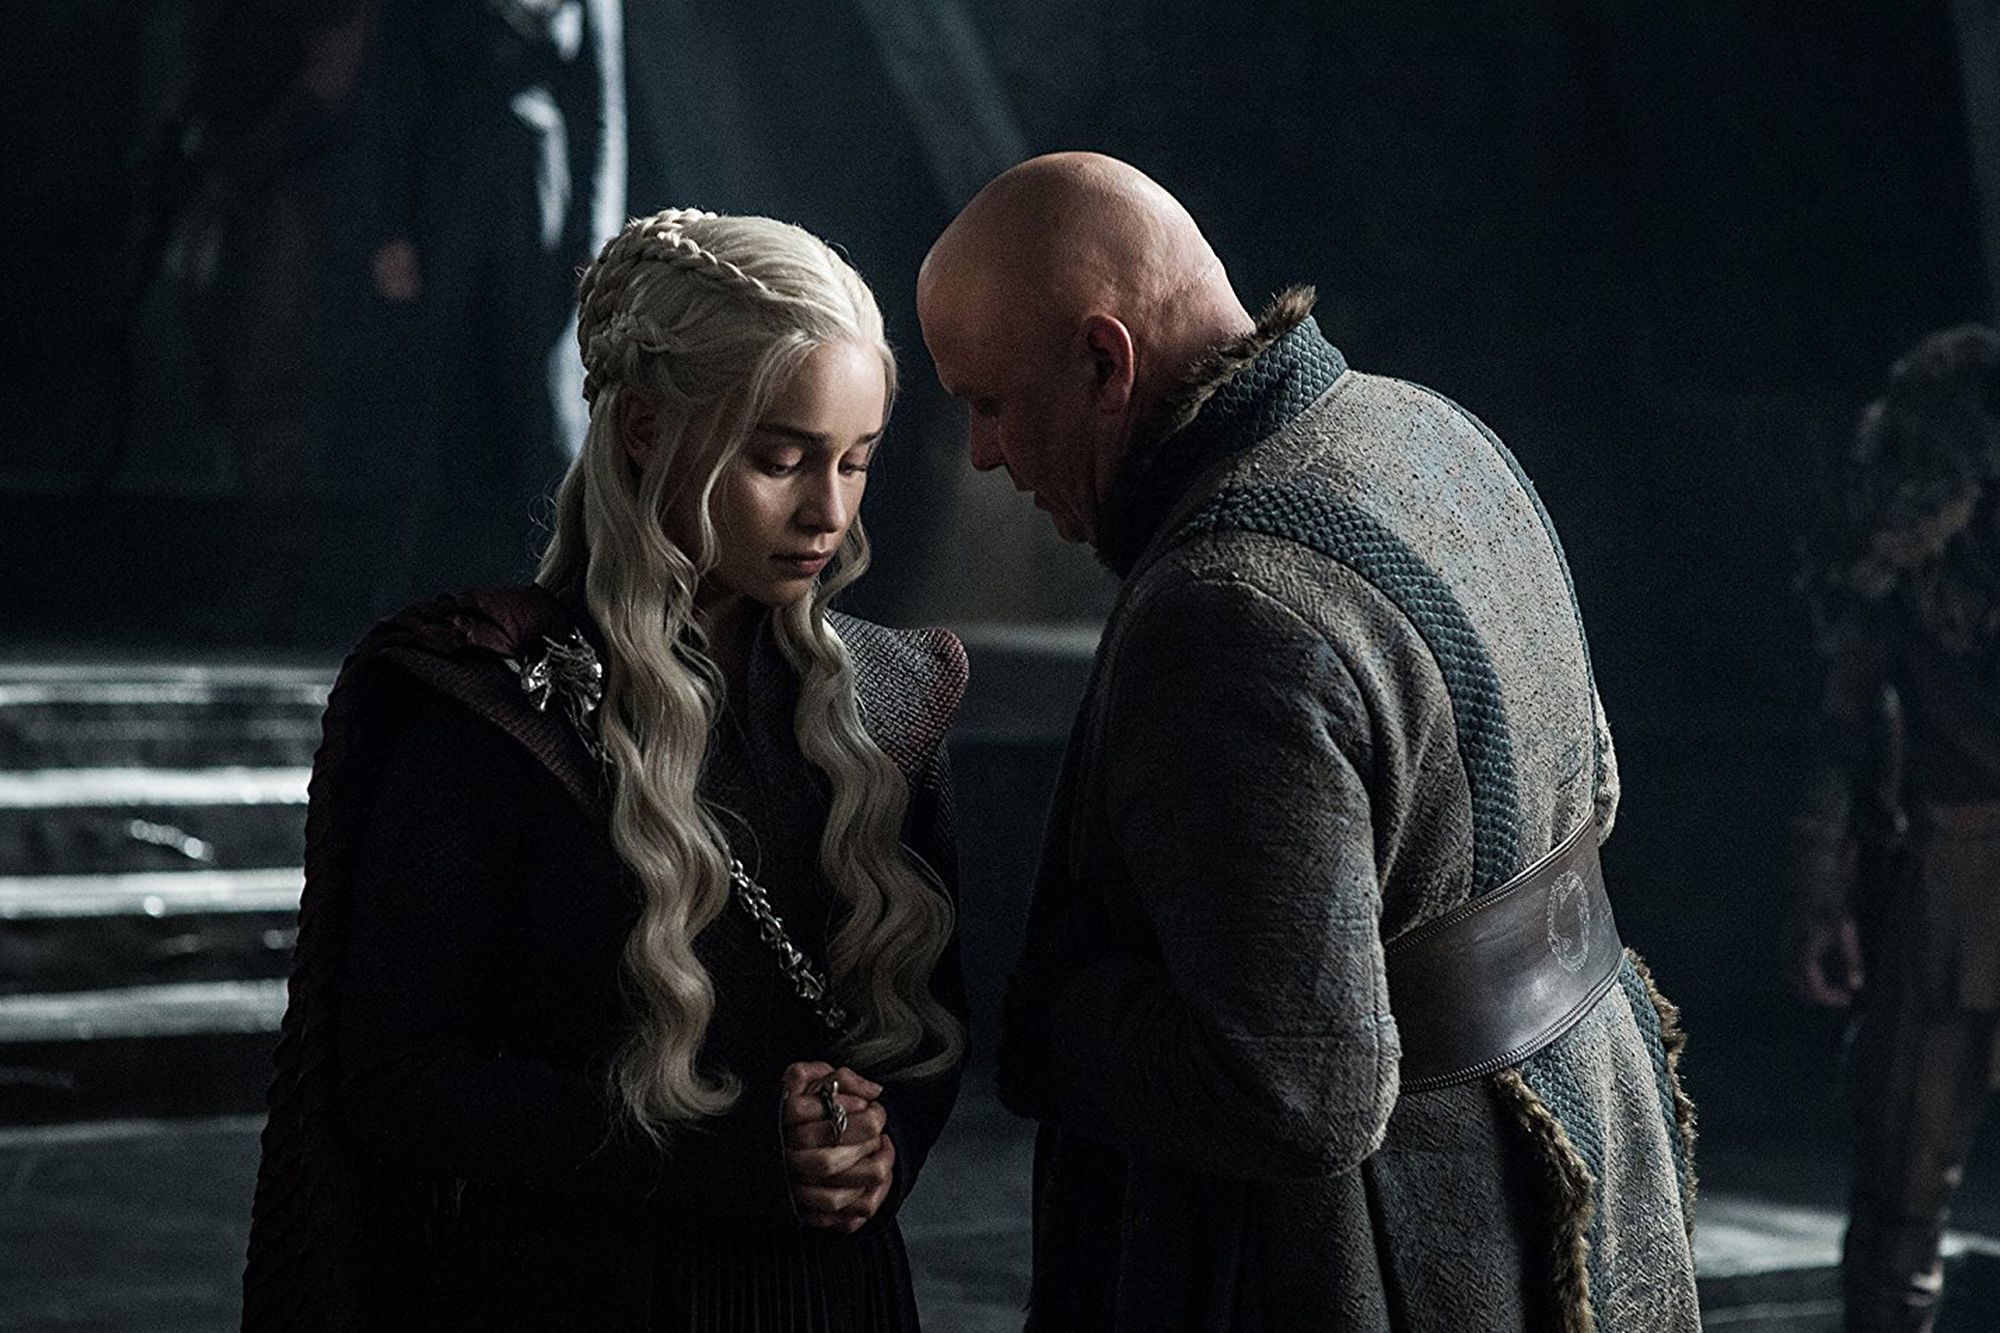 Entrepreneurial Lessons From Game of Thrones and the Super Bowl